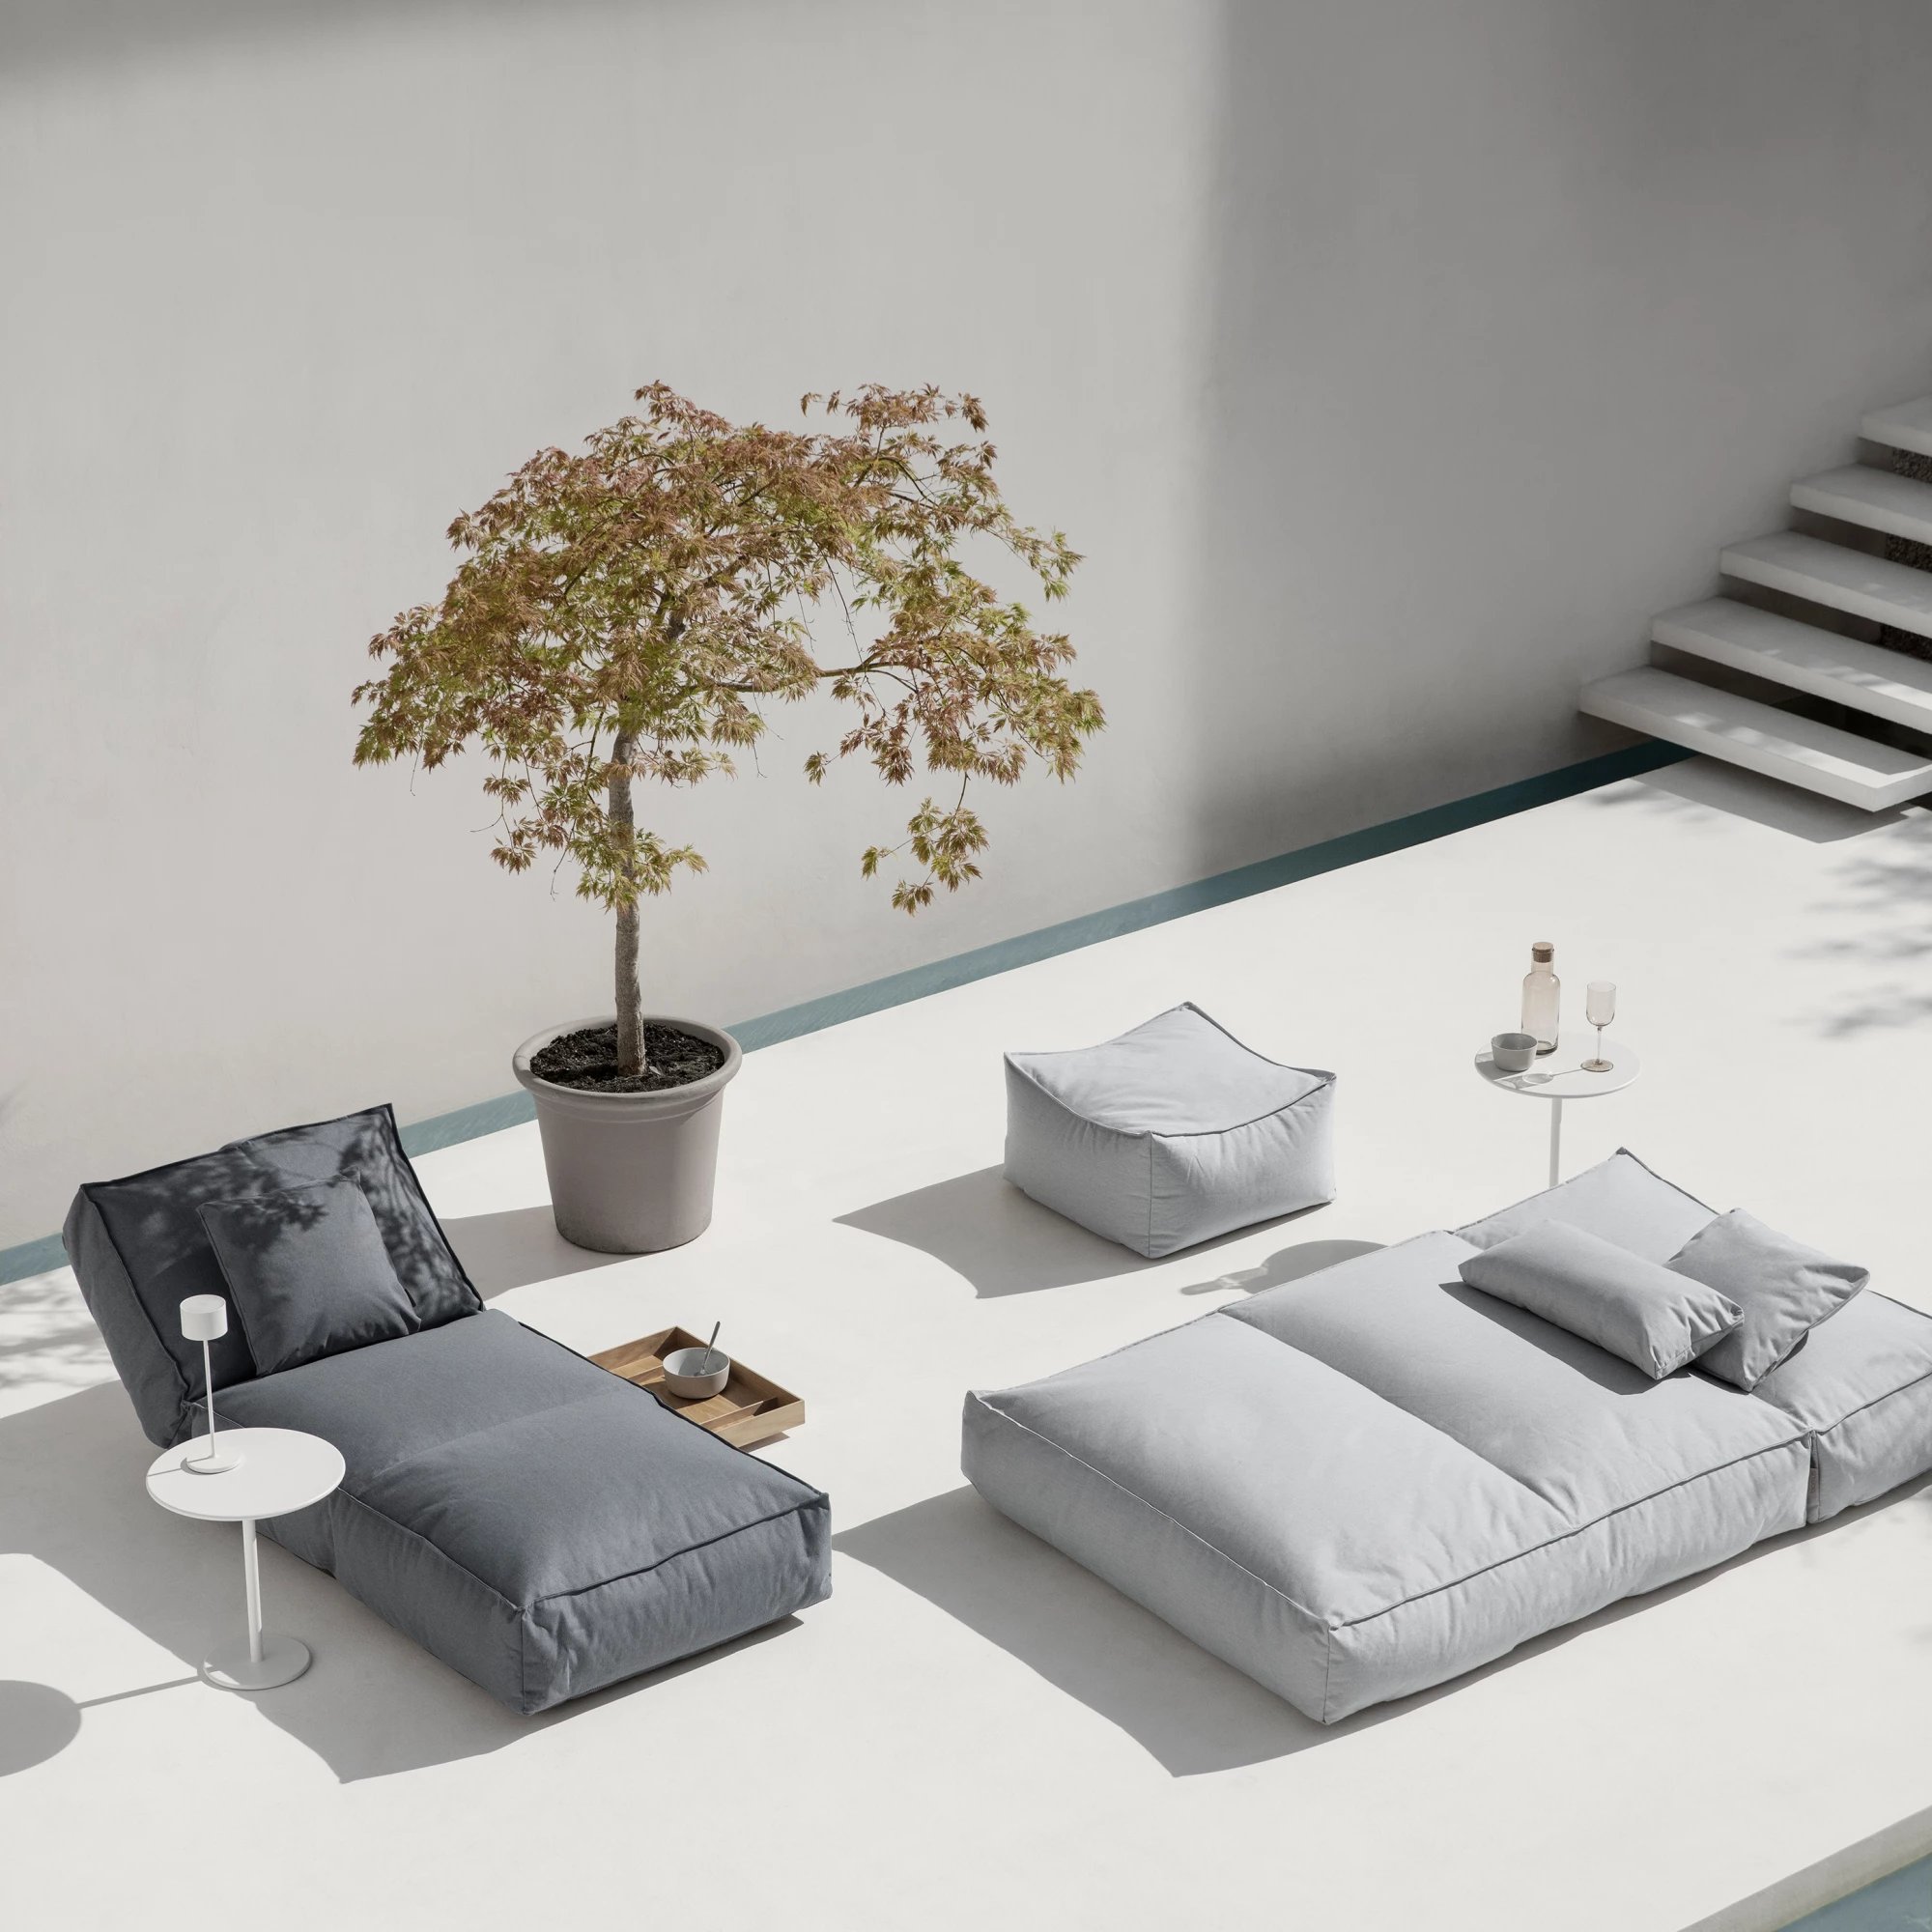 BLOMUS // STAY - OUTDOOR LOUNGER L | CLOUD